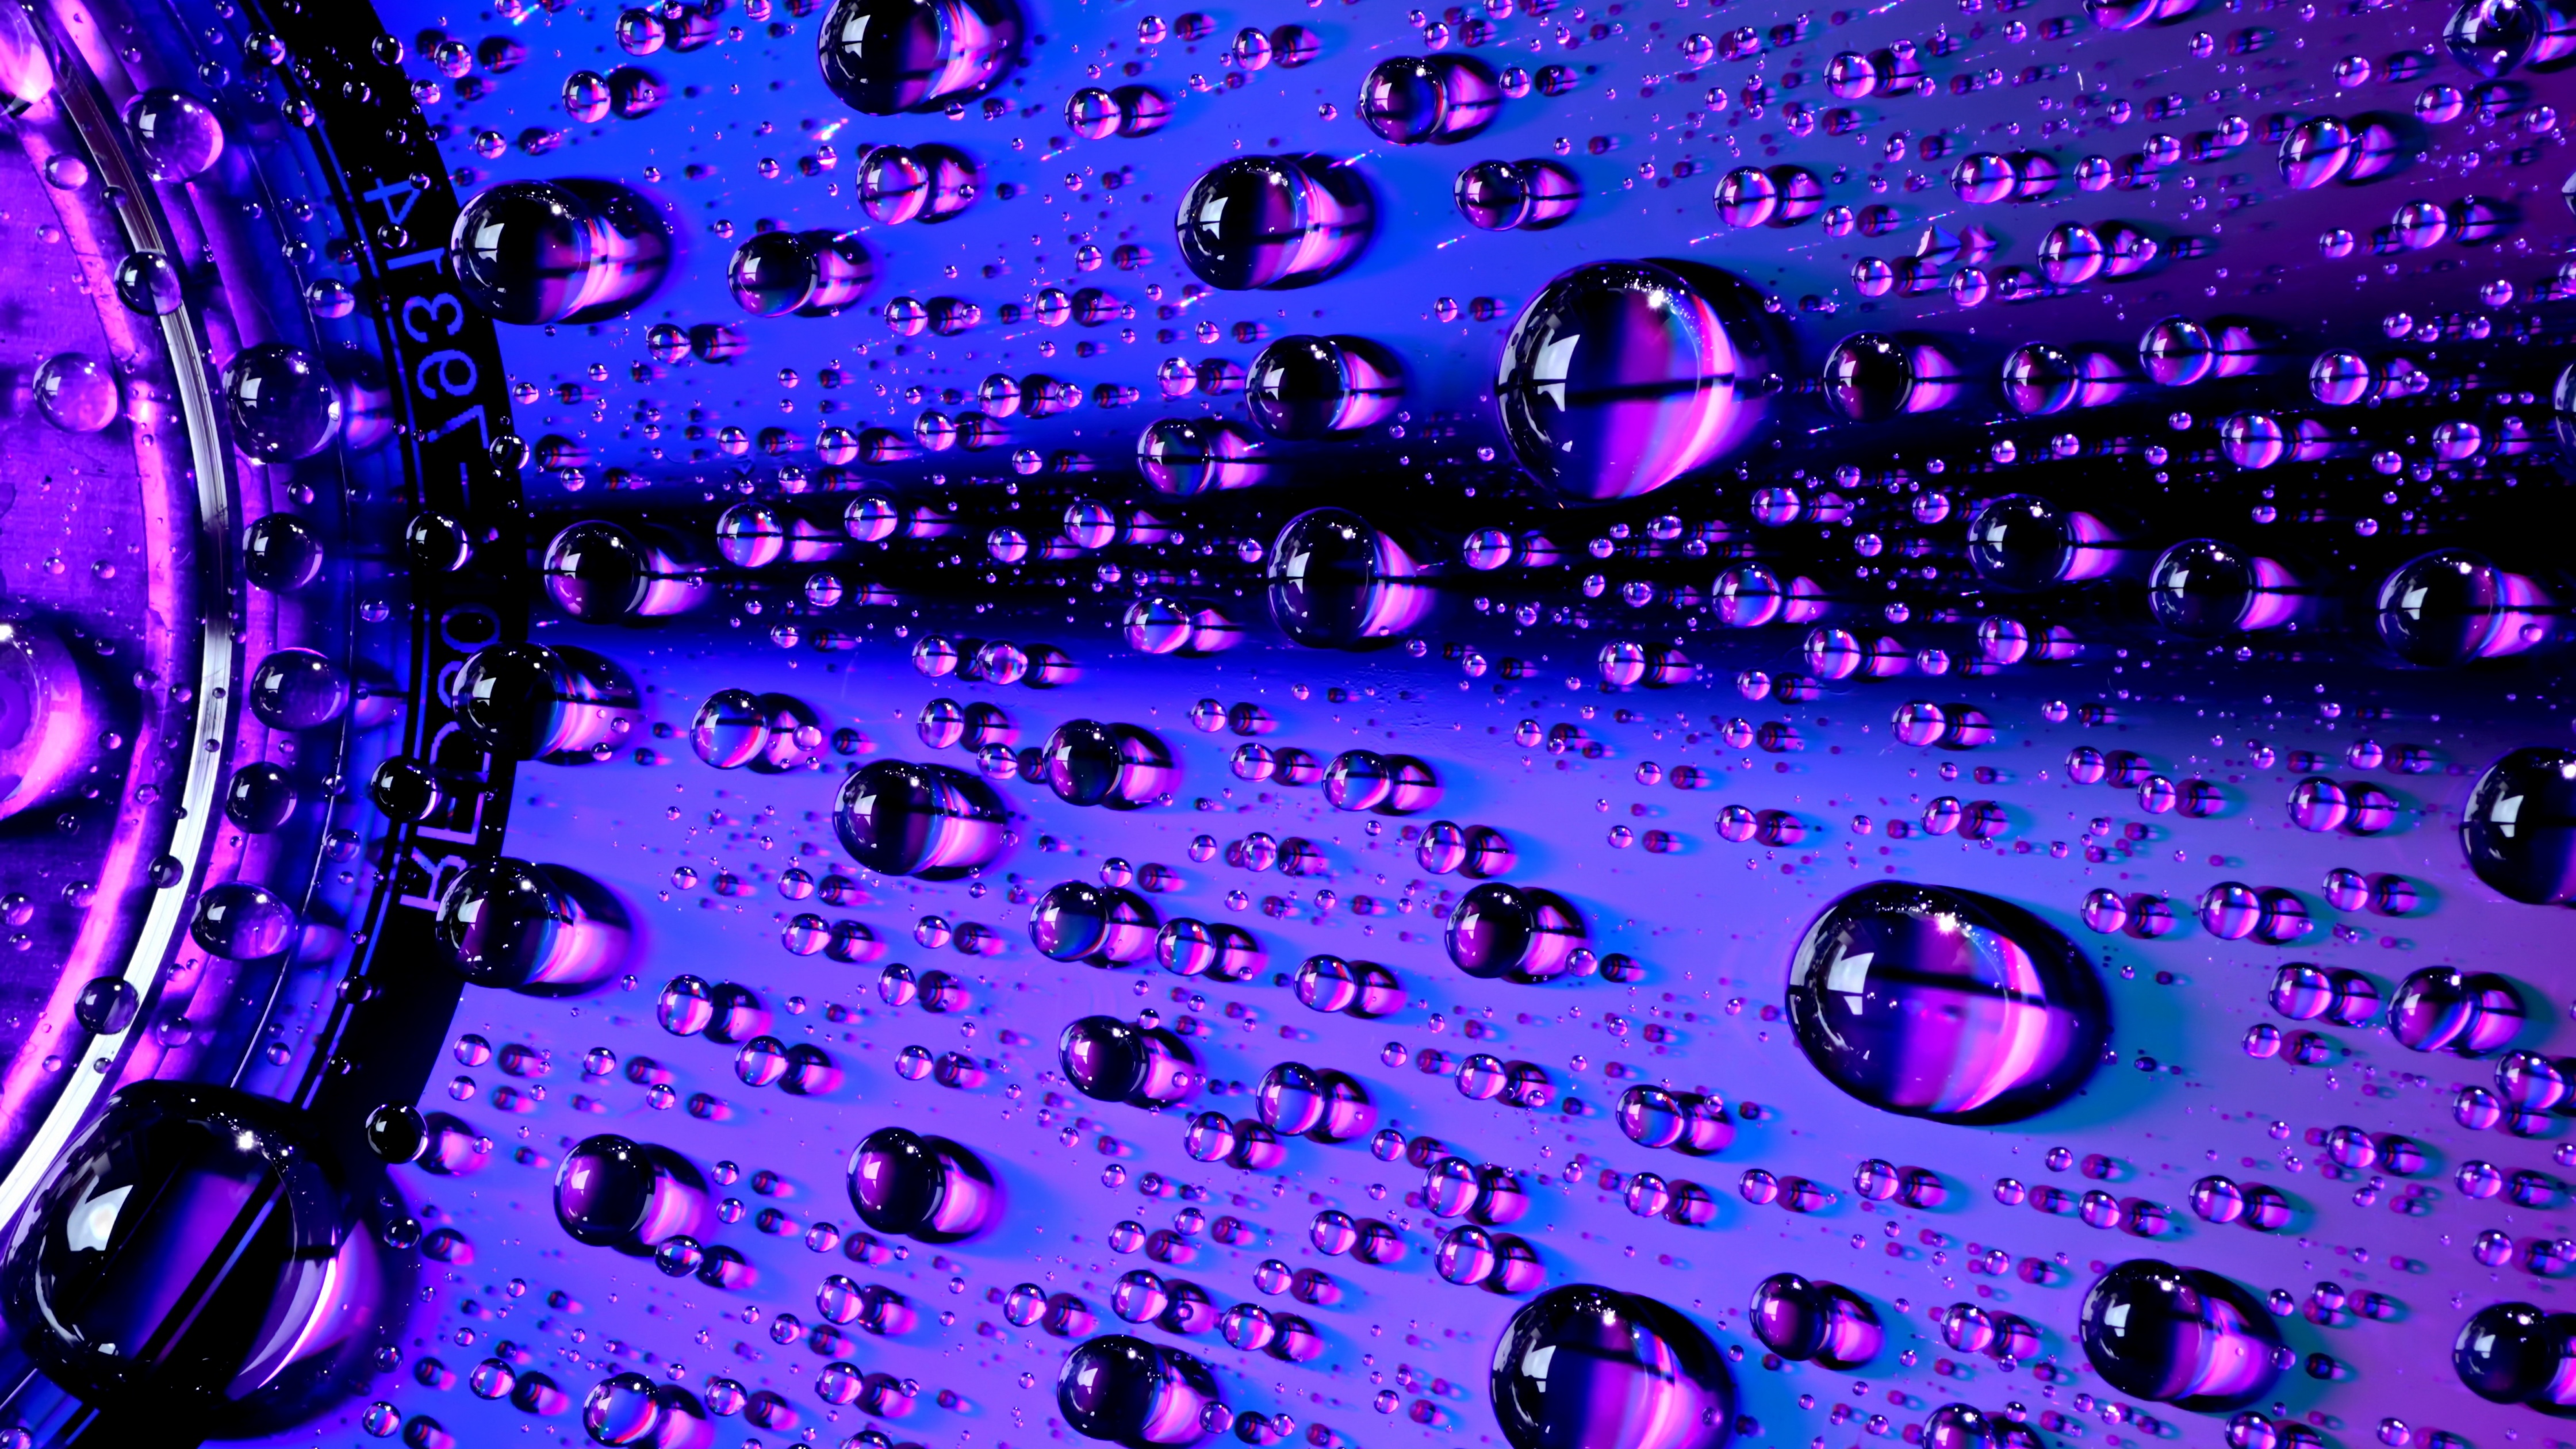 Water Droplets on Window Live Wallpaper - free download